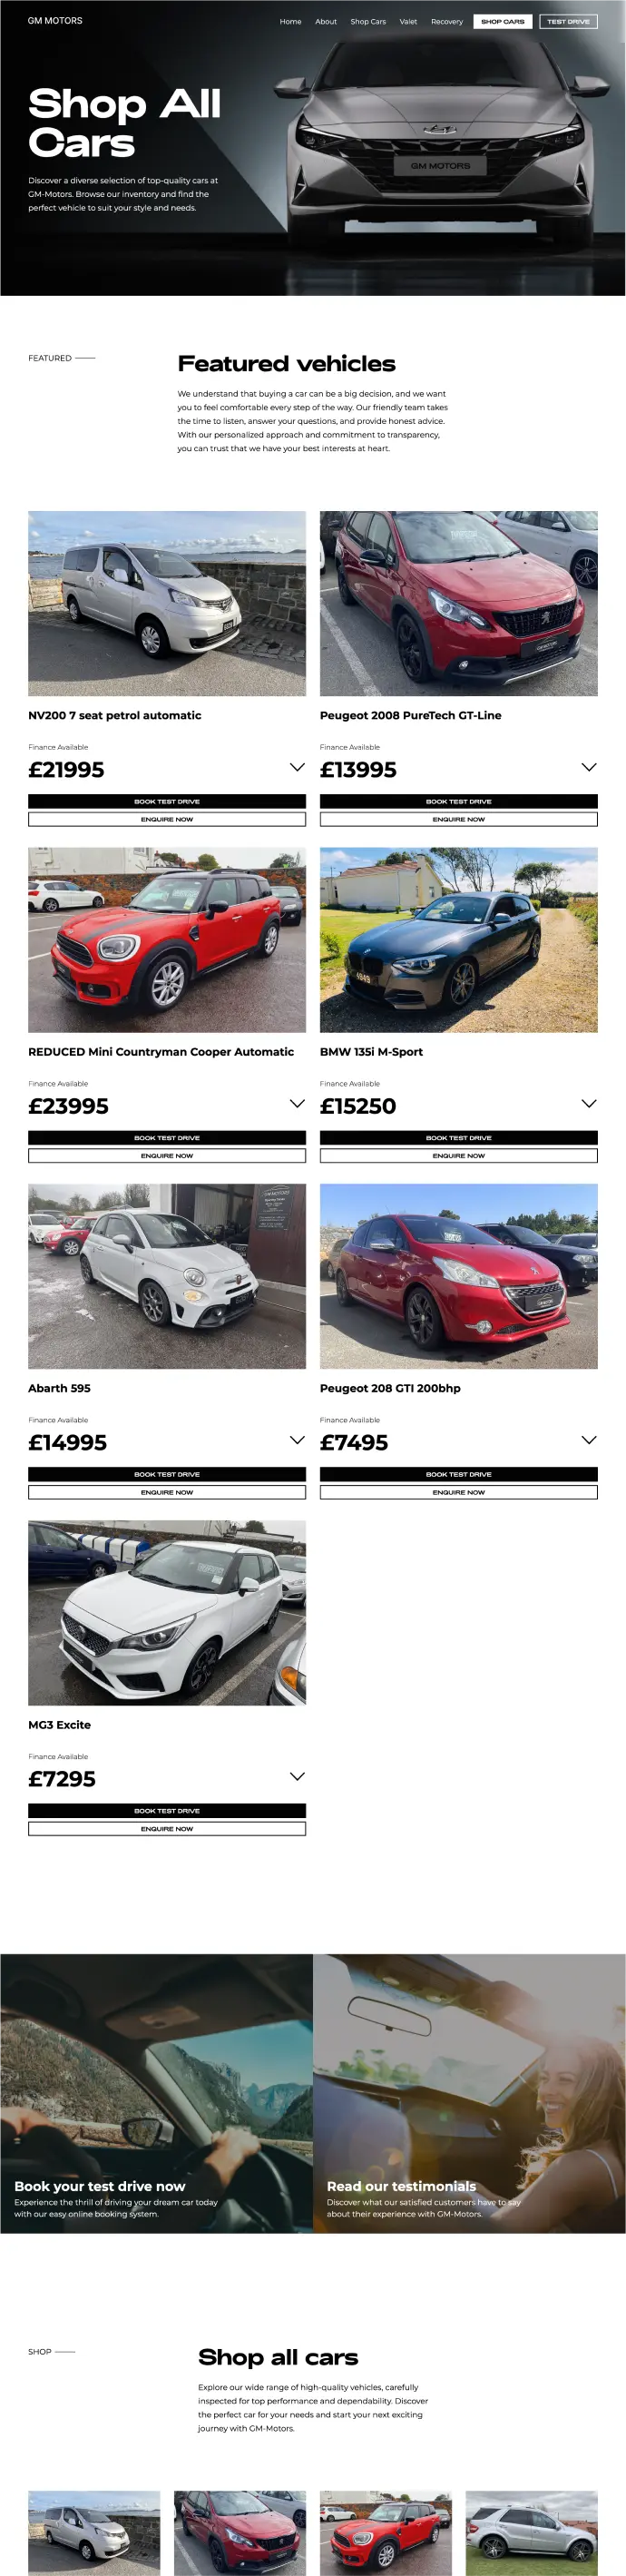 GM Motors Guernsey Car Website All Cars Page